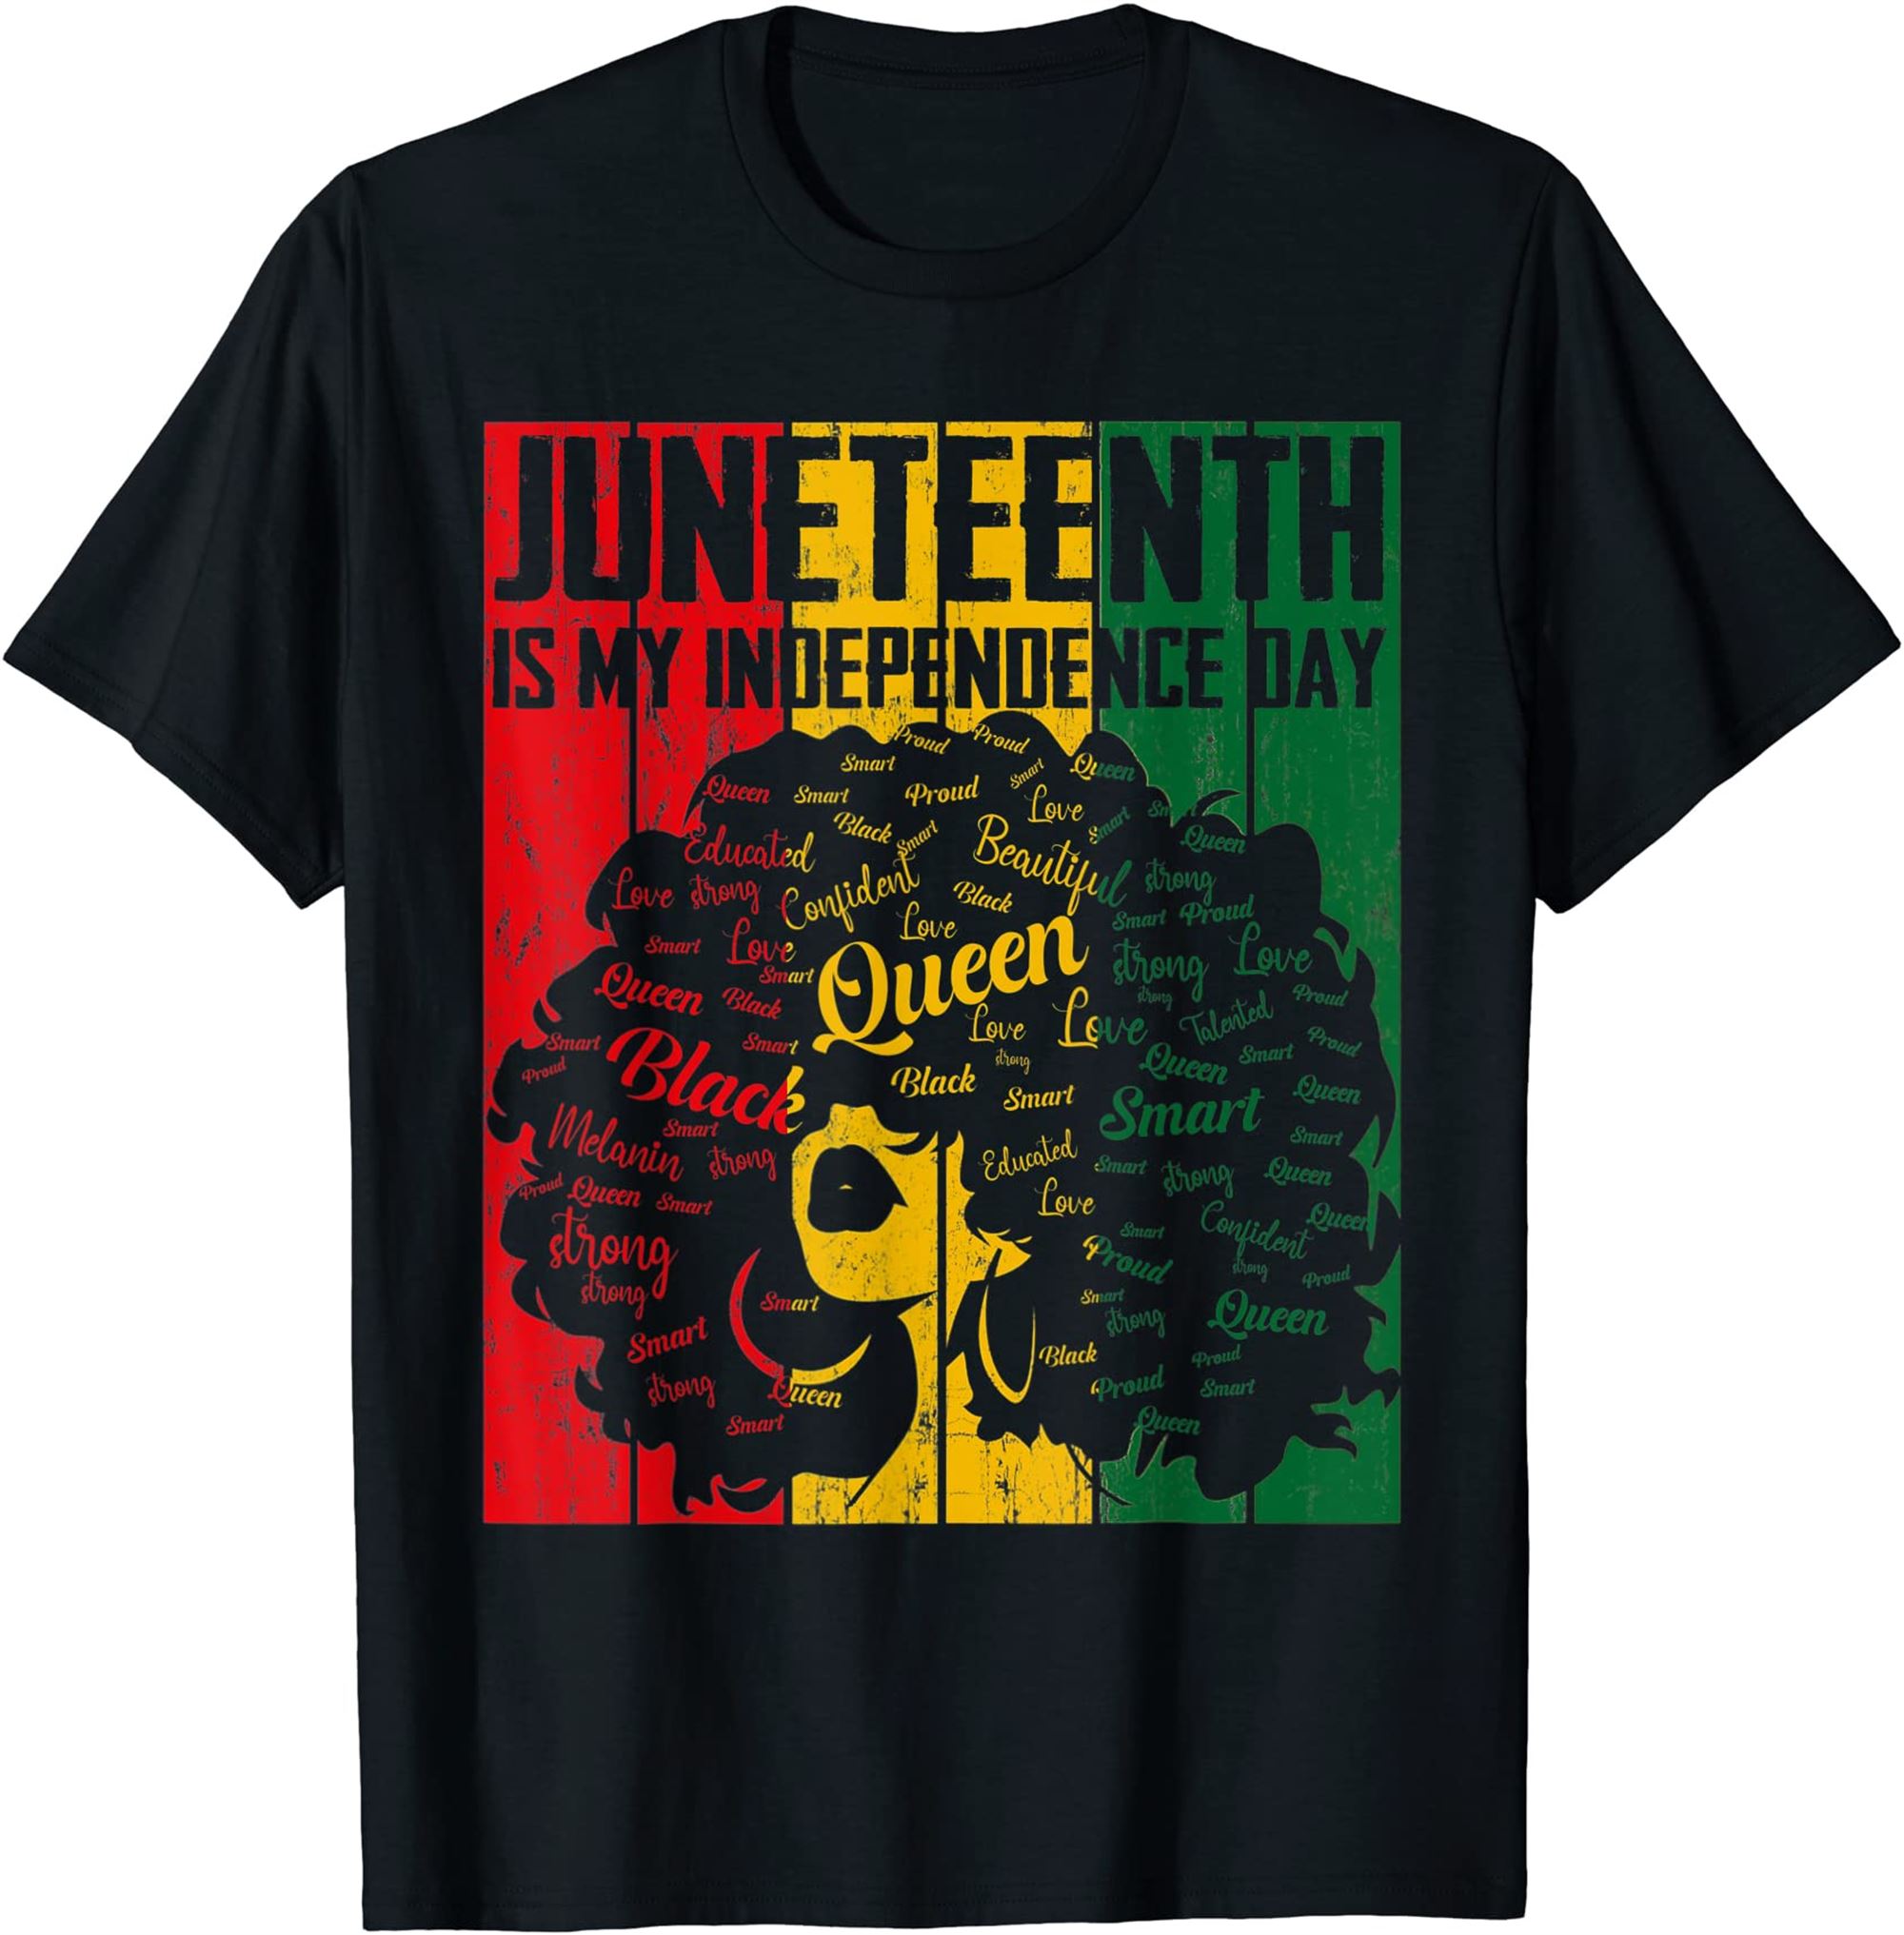 Juneteenth Is My Independence Day Dope Girl Afro Black Queen T-shirt Full Size Up To 5xl